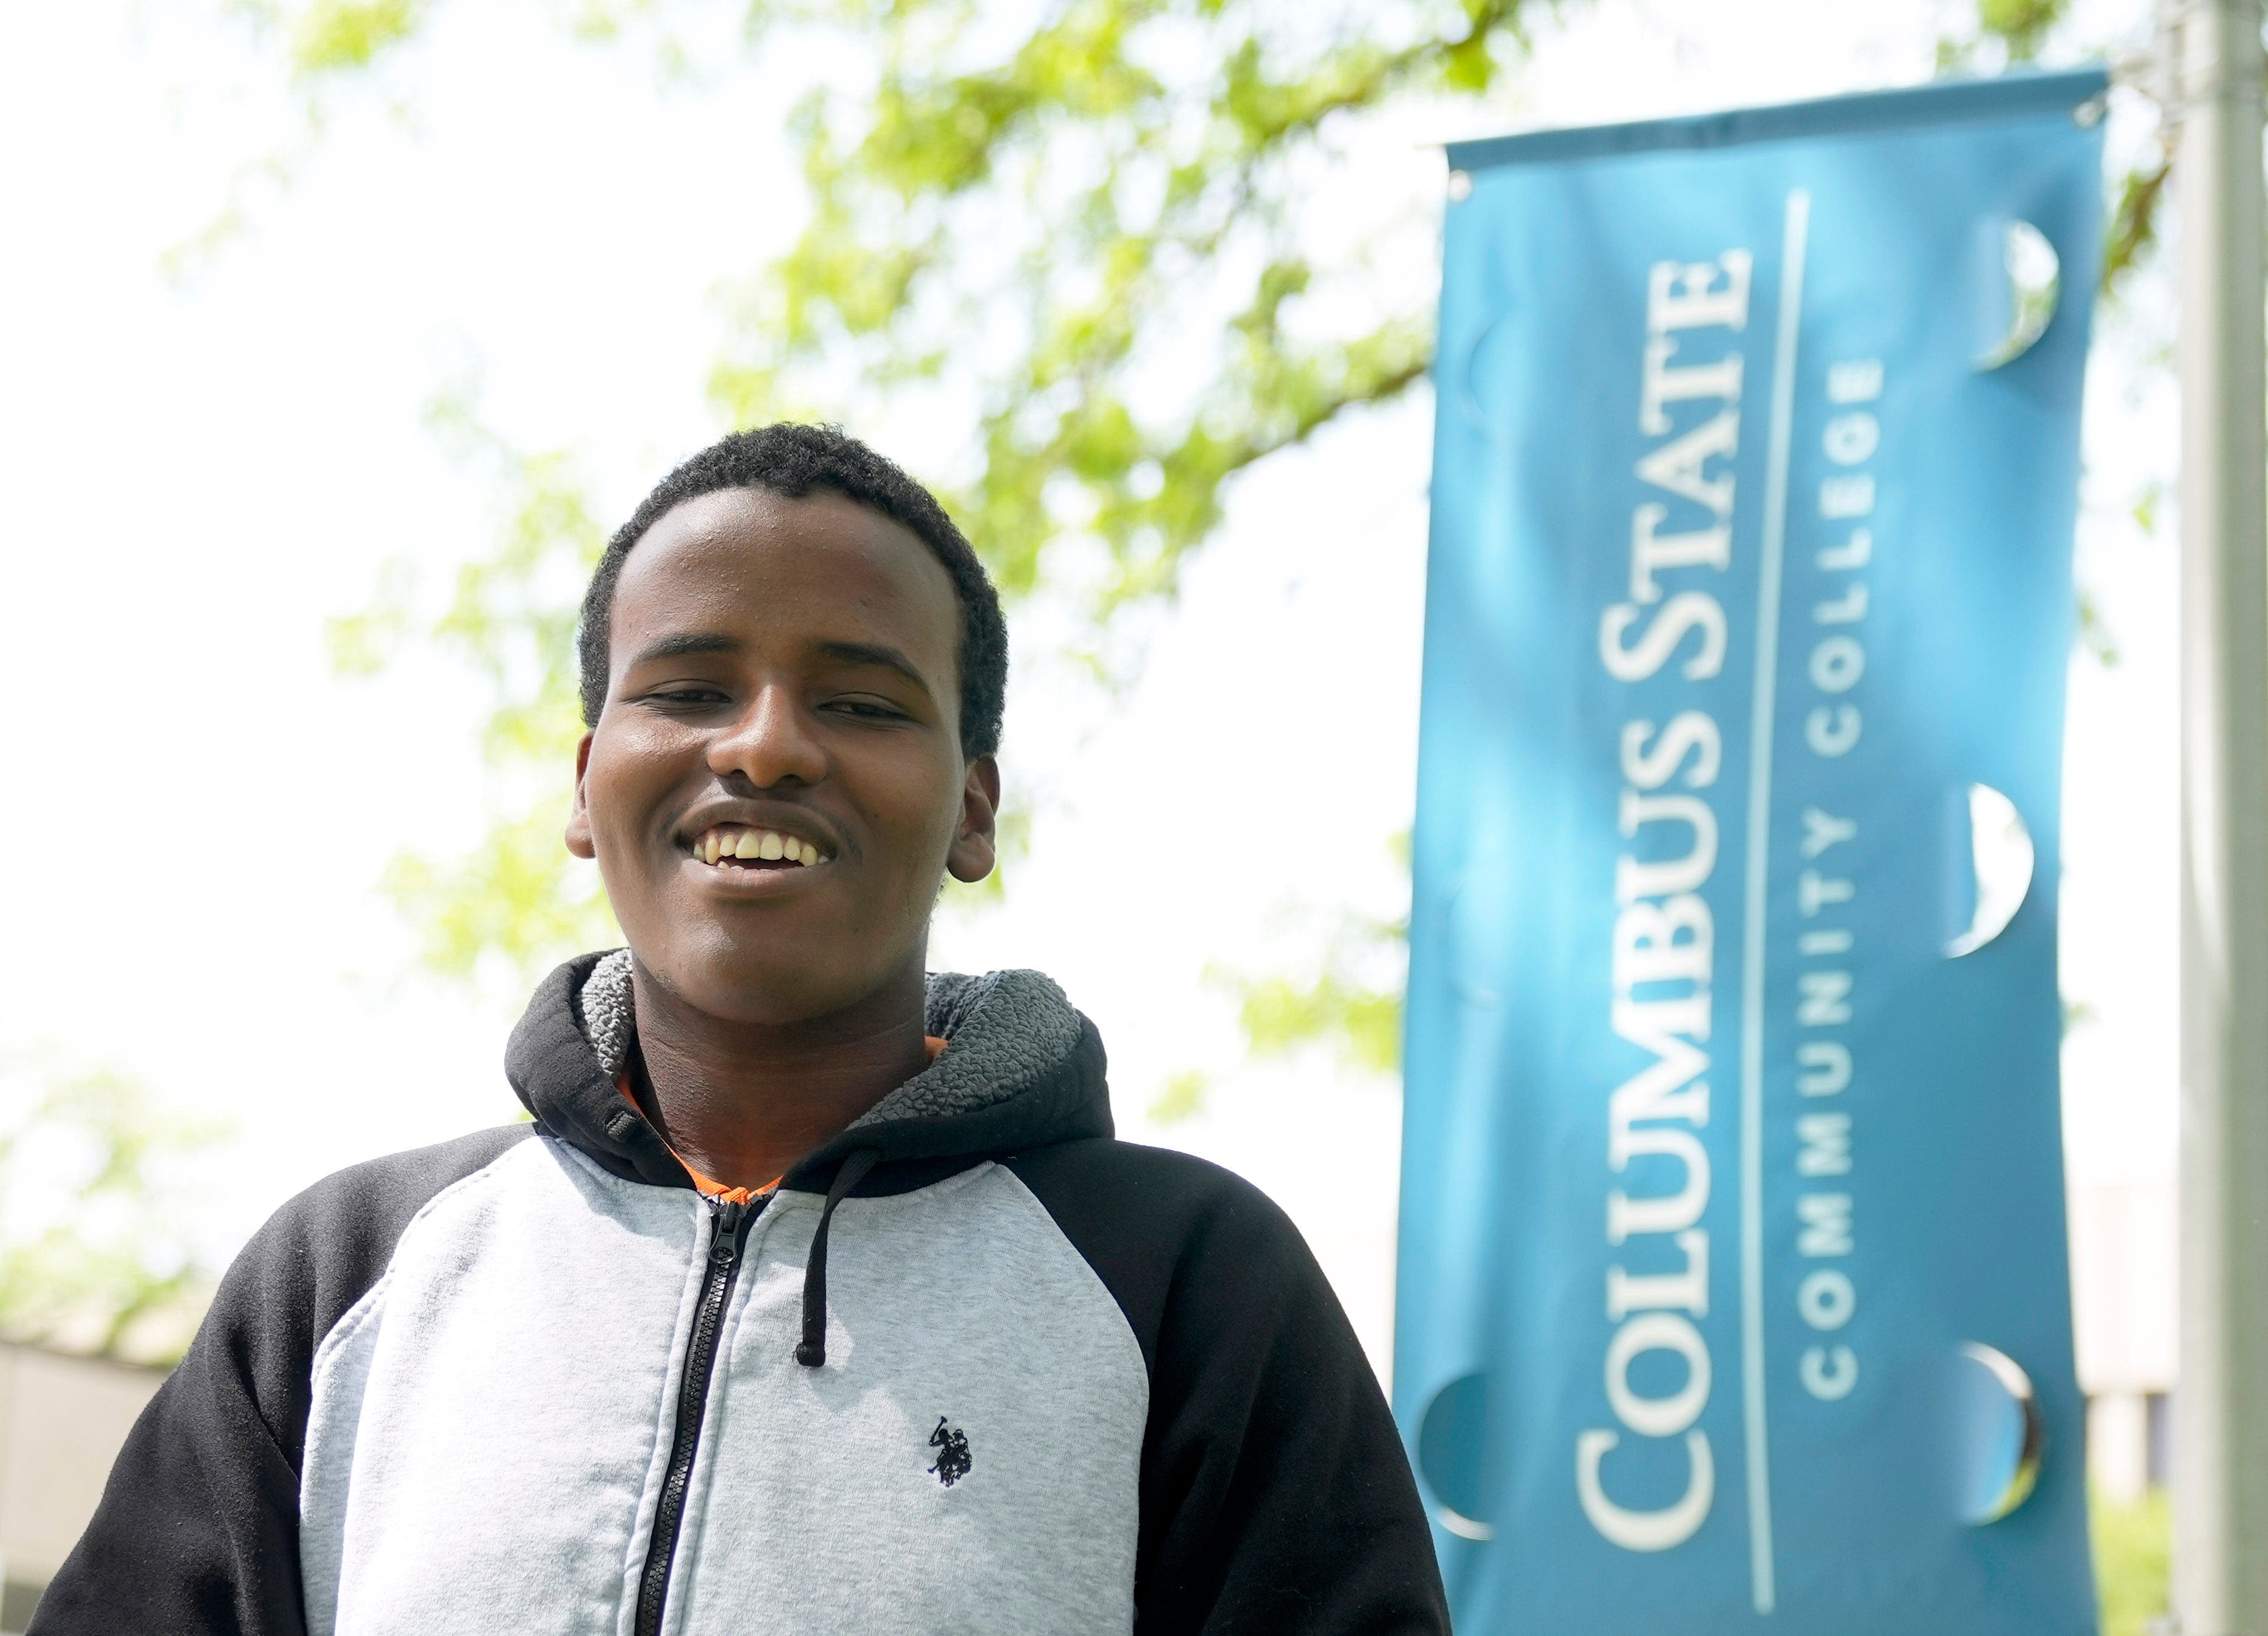 From mental health crises to college apps, nonprofit helps Somali youth in central Ohio